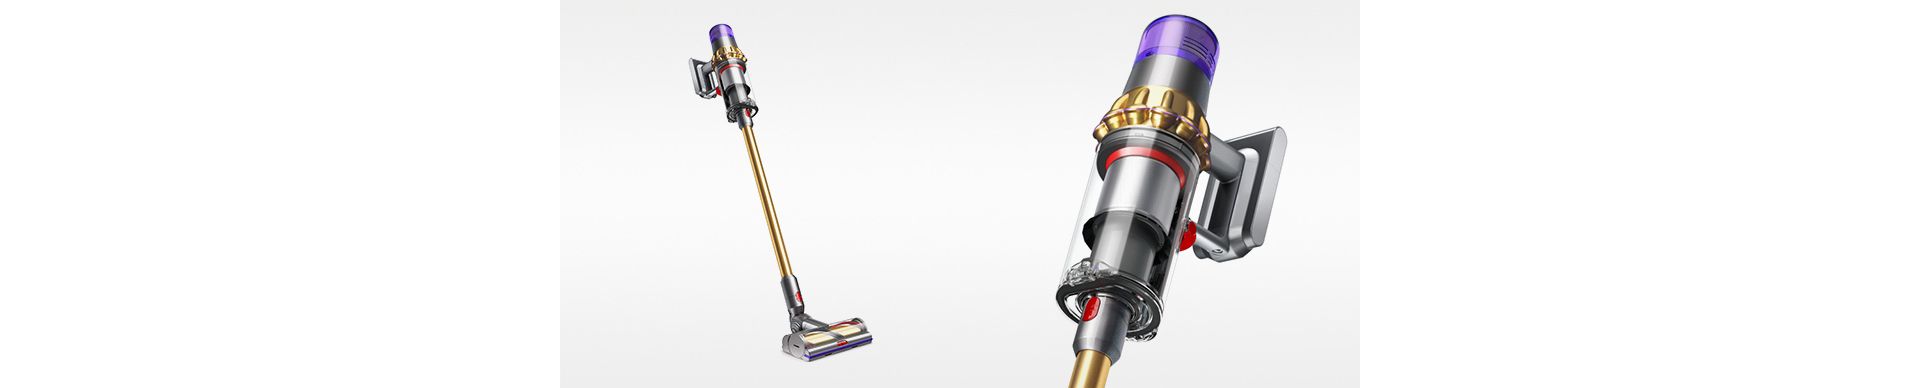 Image showing Dyson V11 Absolute Extra Gold cordless vacuum